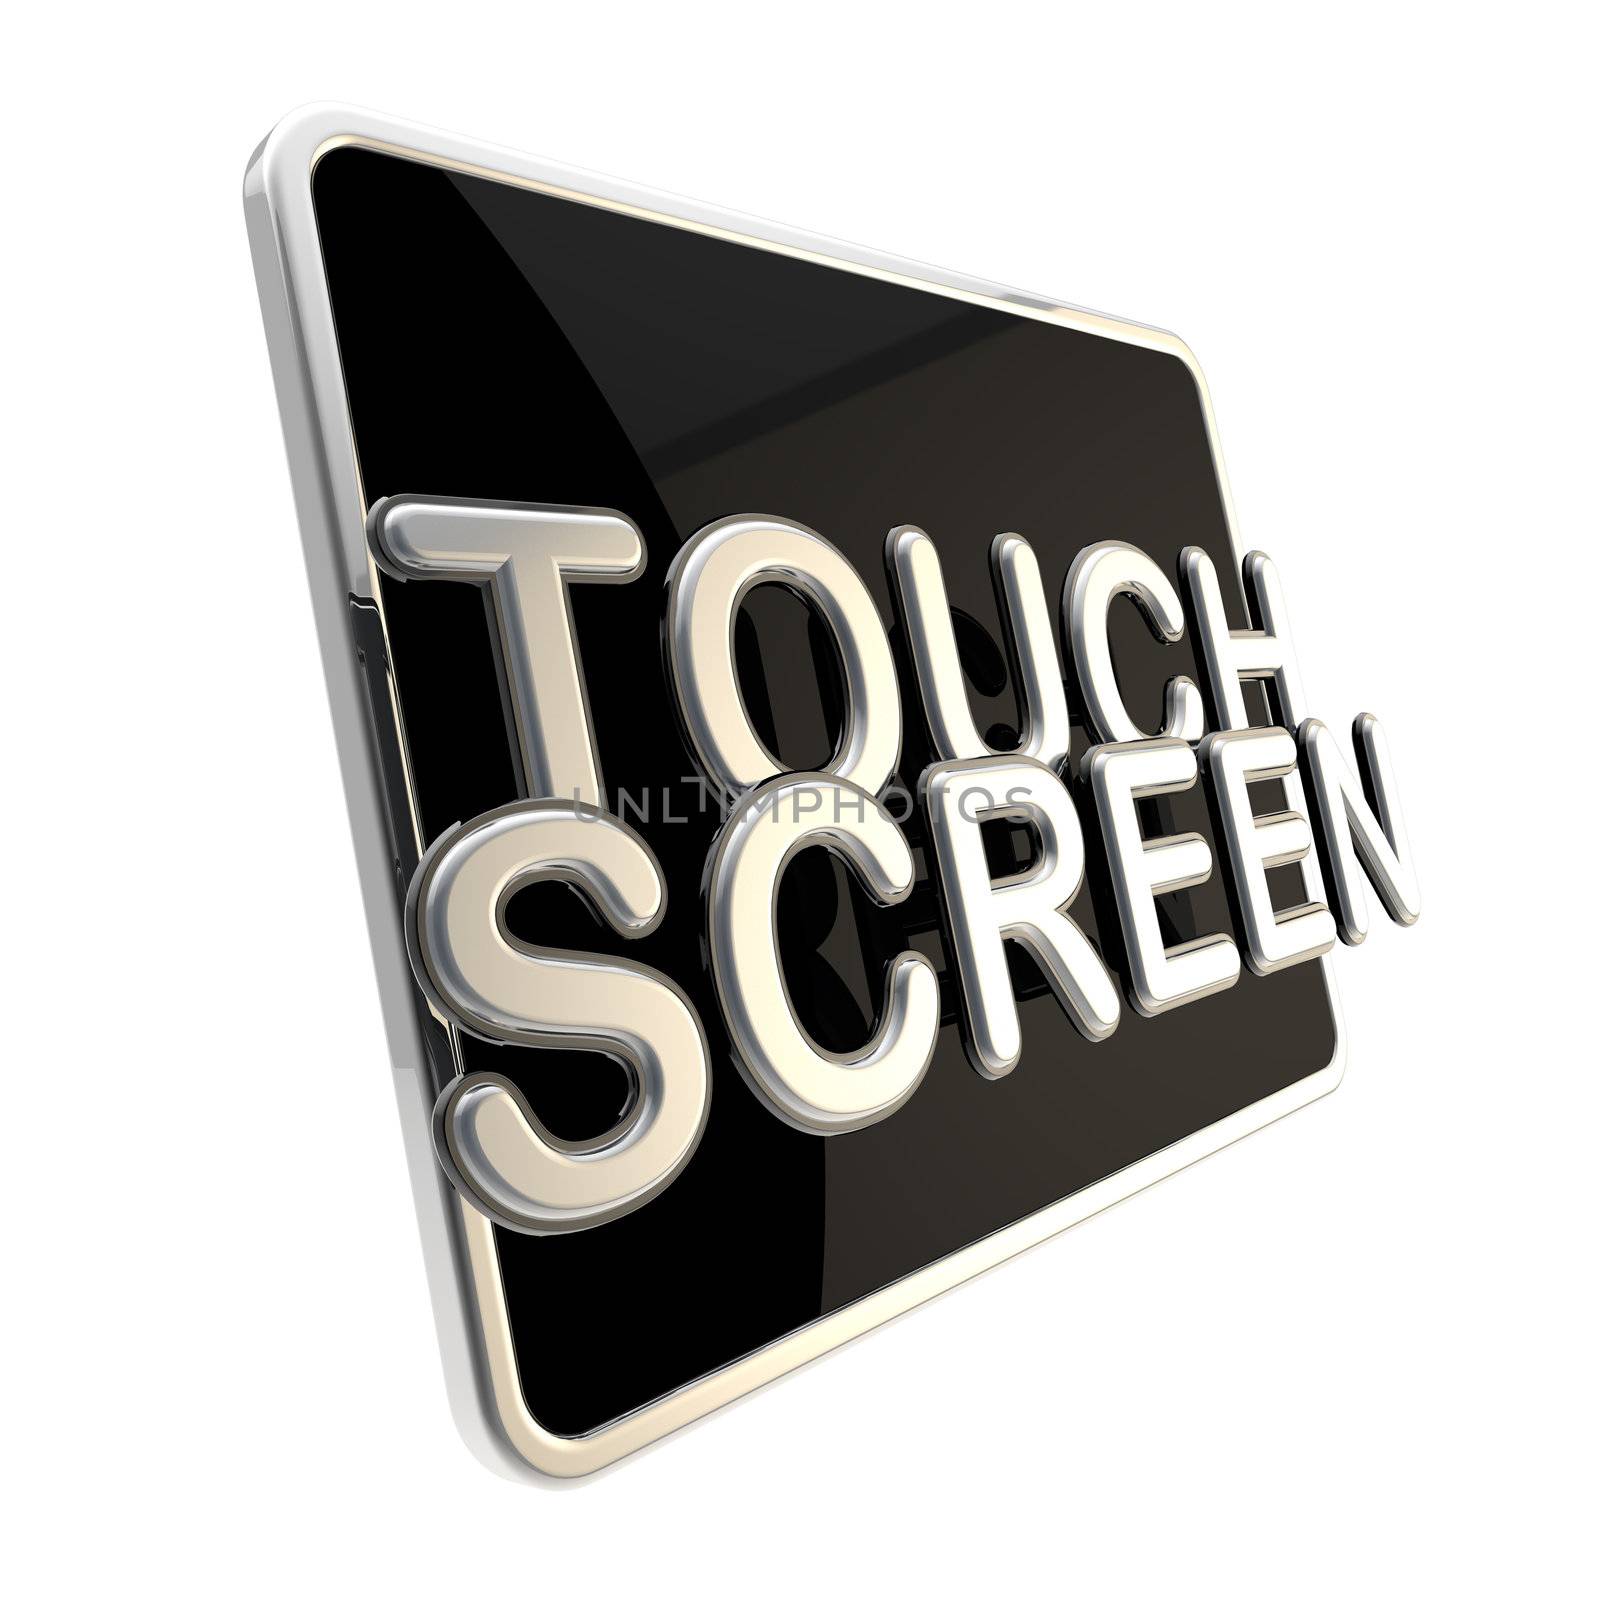 Touch screen icon as a glossy pad by nbvf